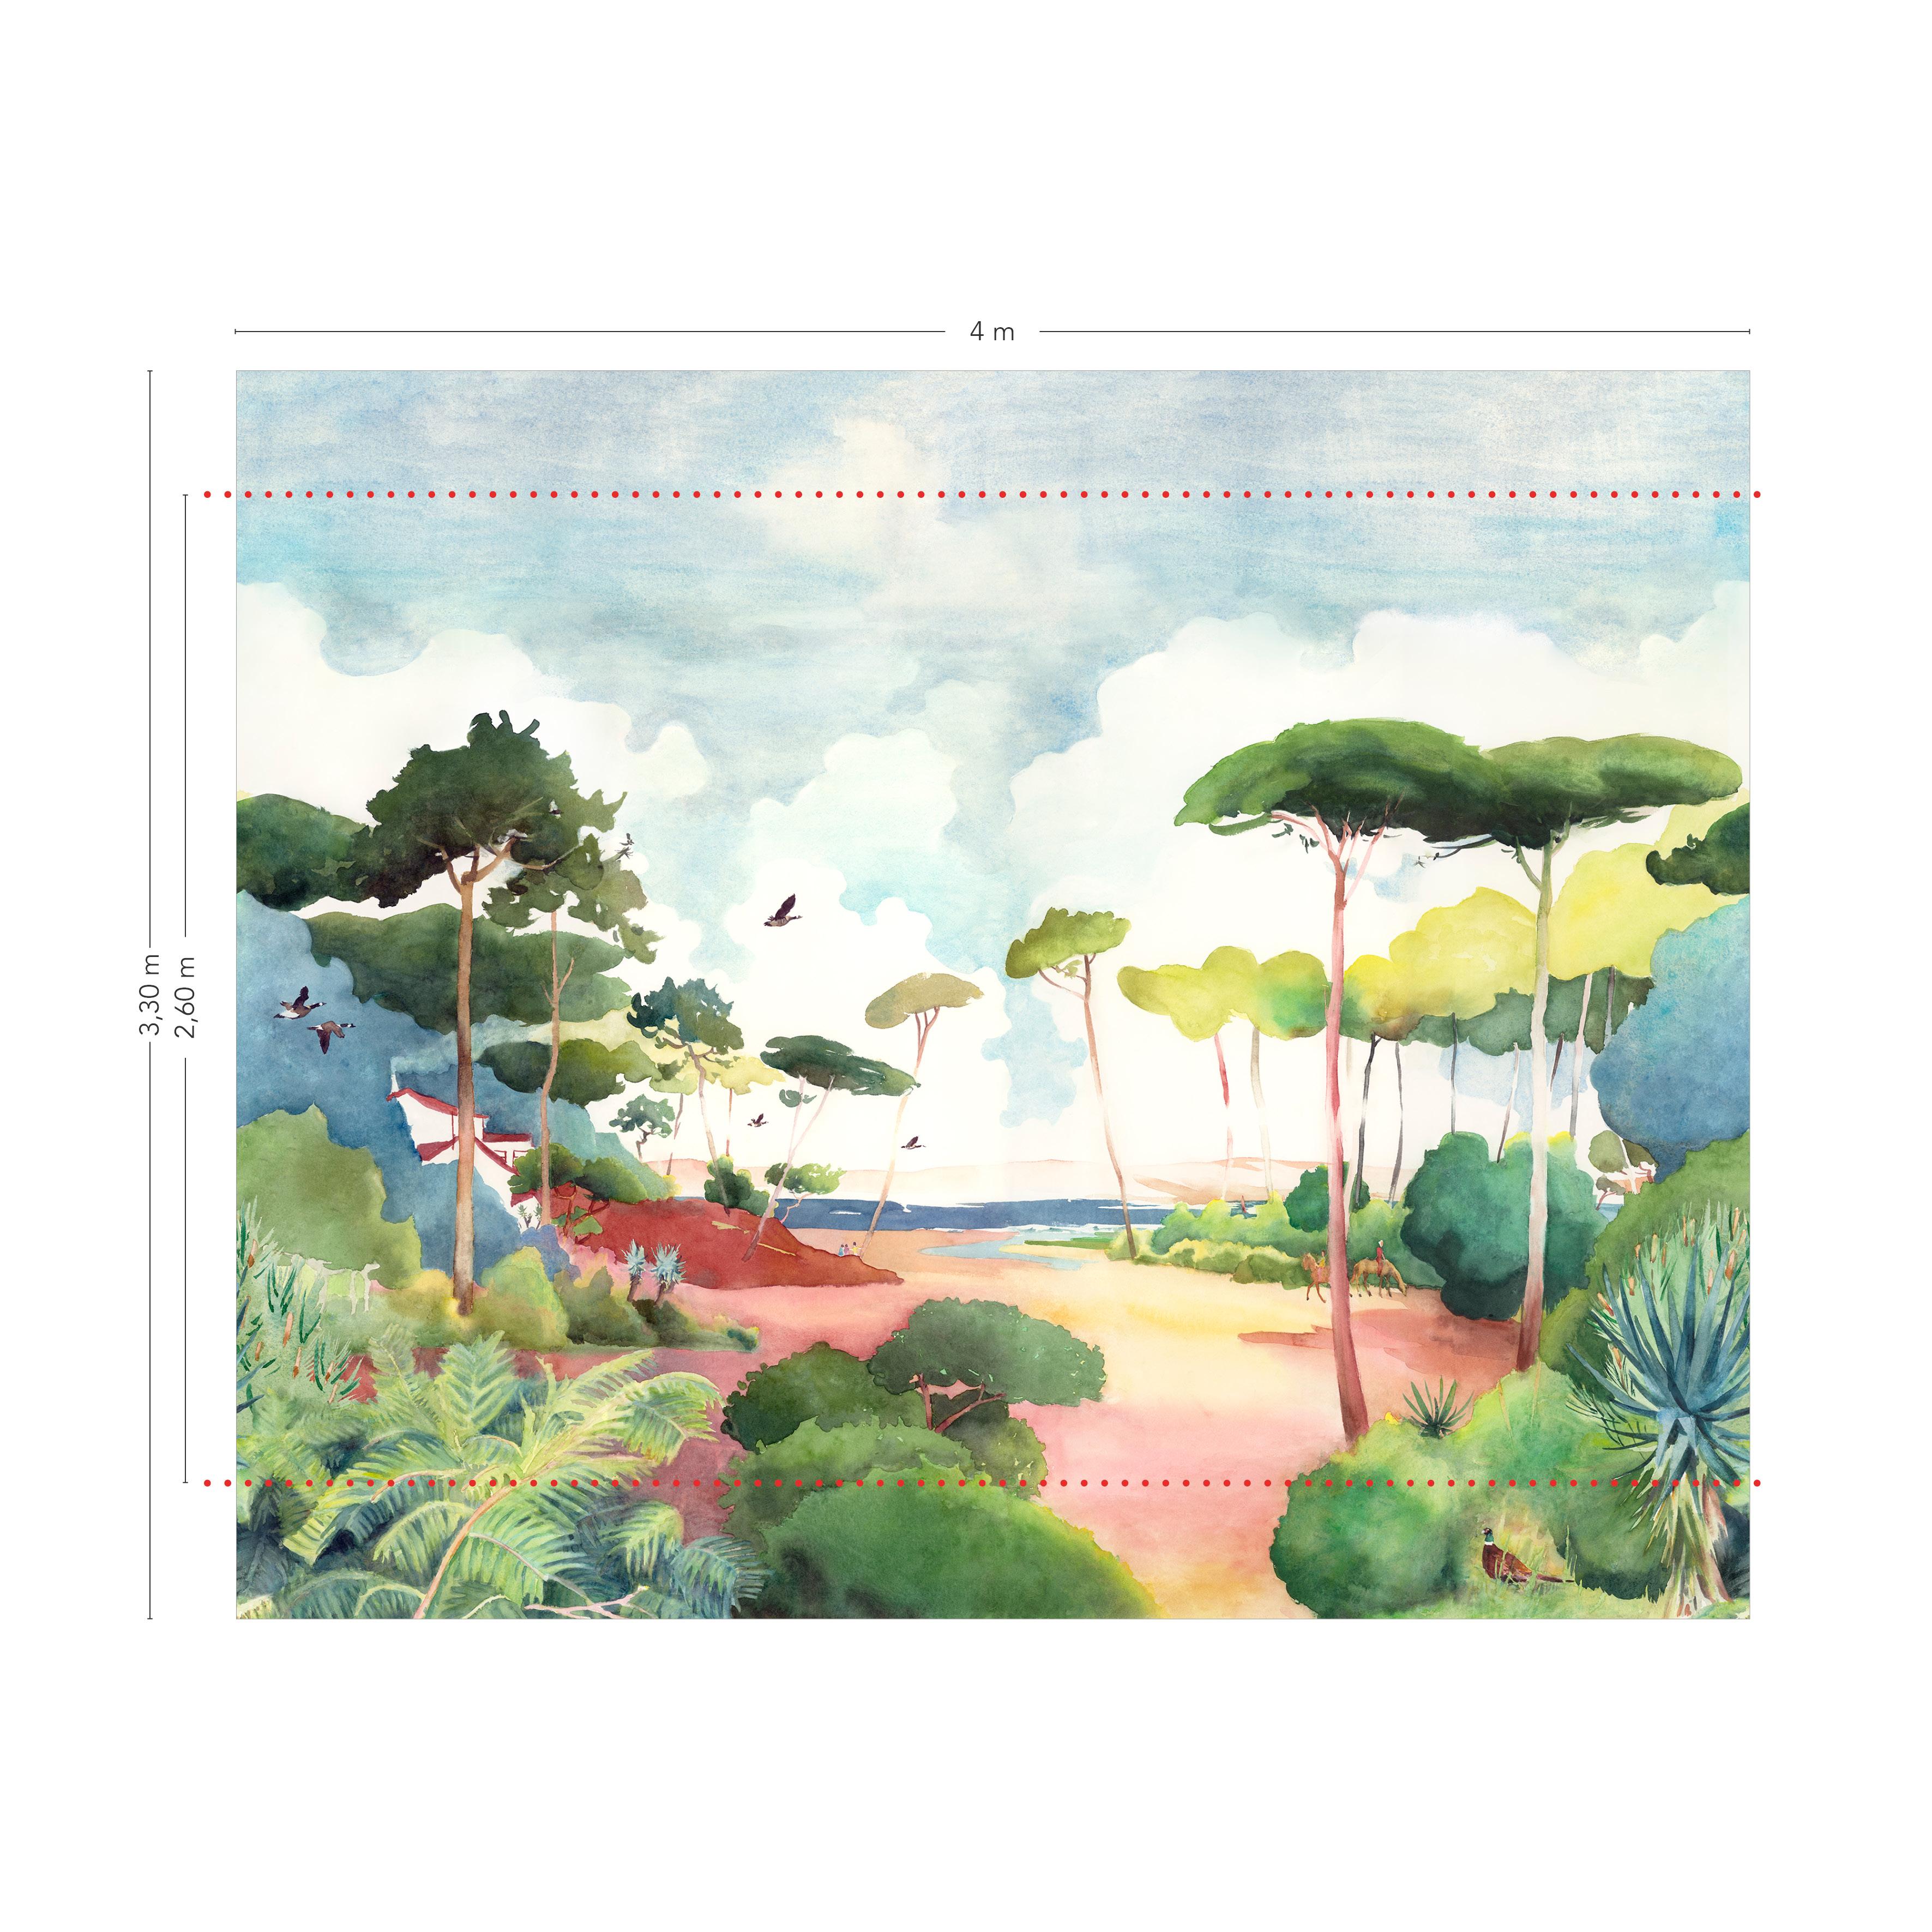 French Forêt, Customizable, Digital Printing, Mural Decor, Isidore Leroy For Sale